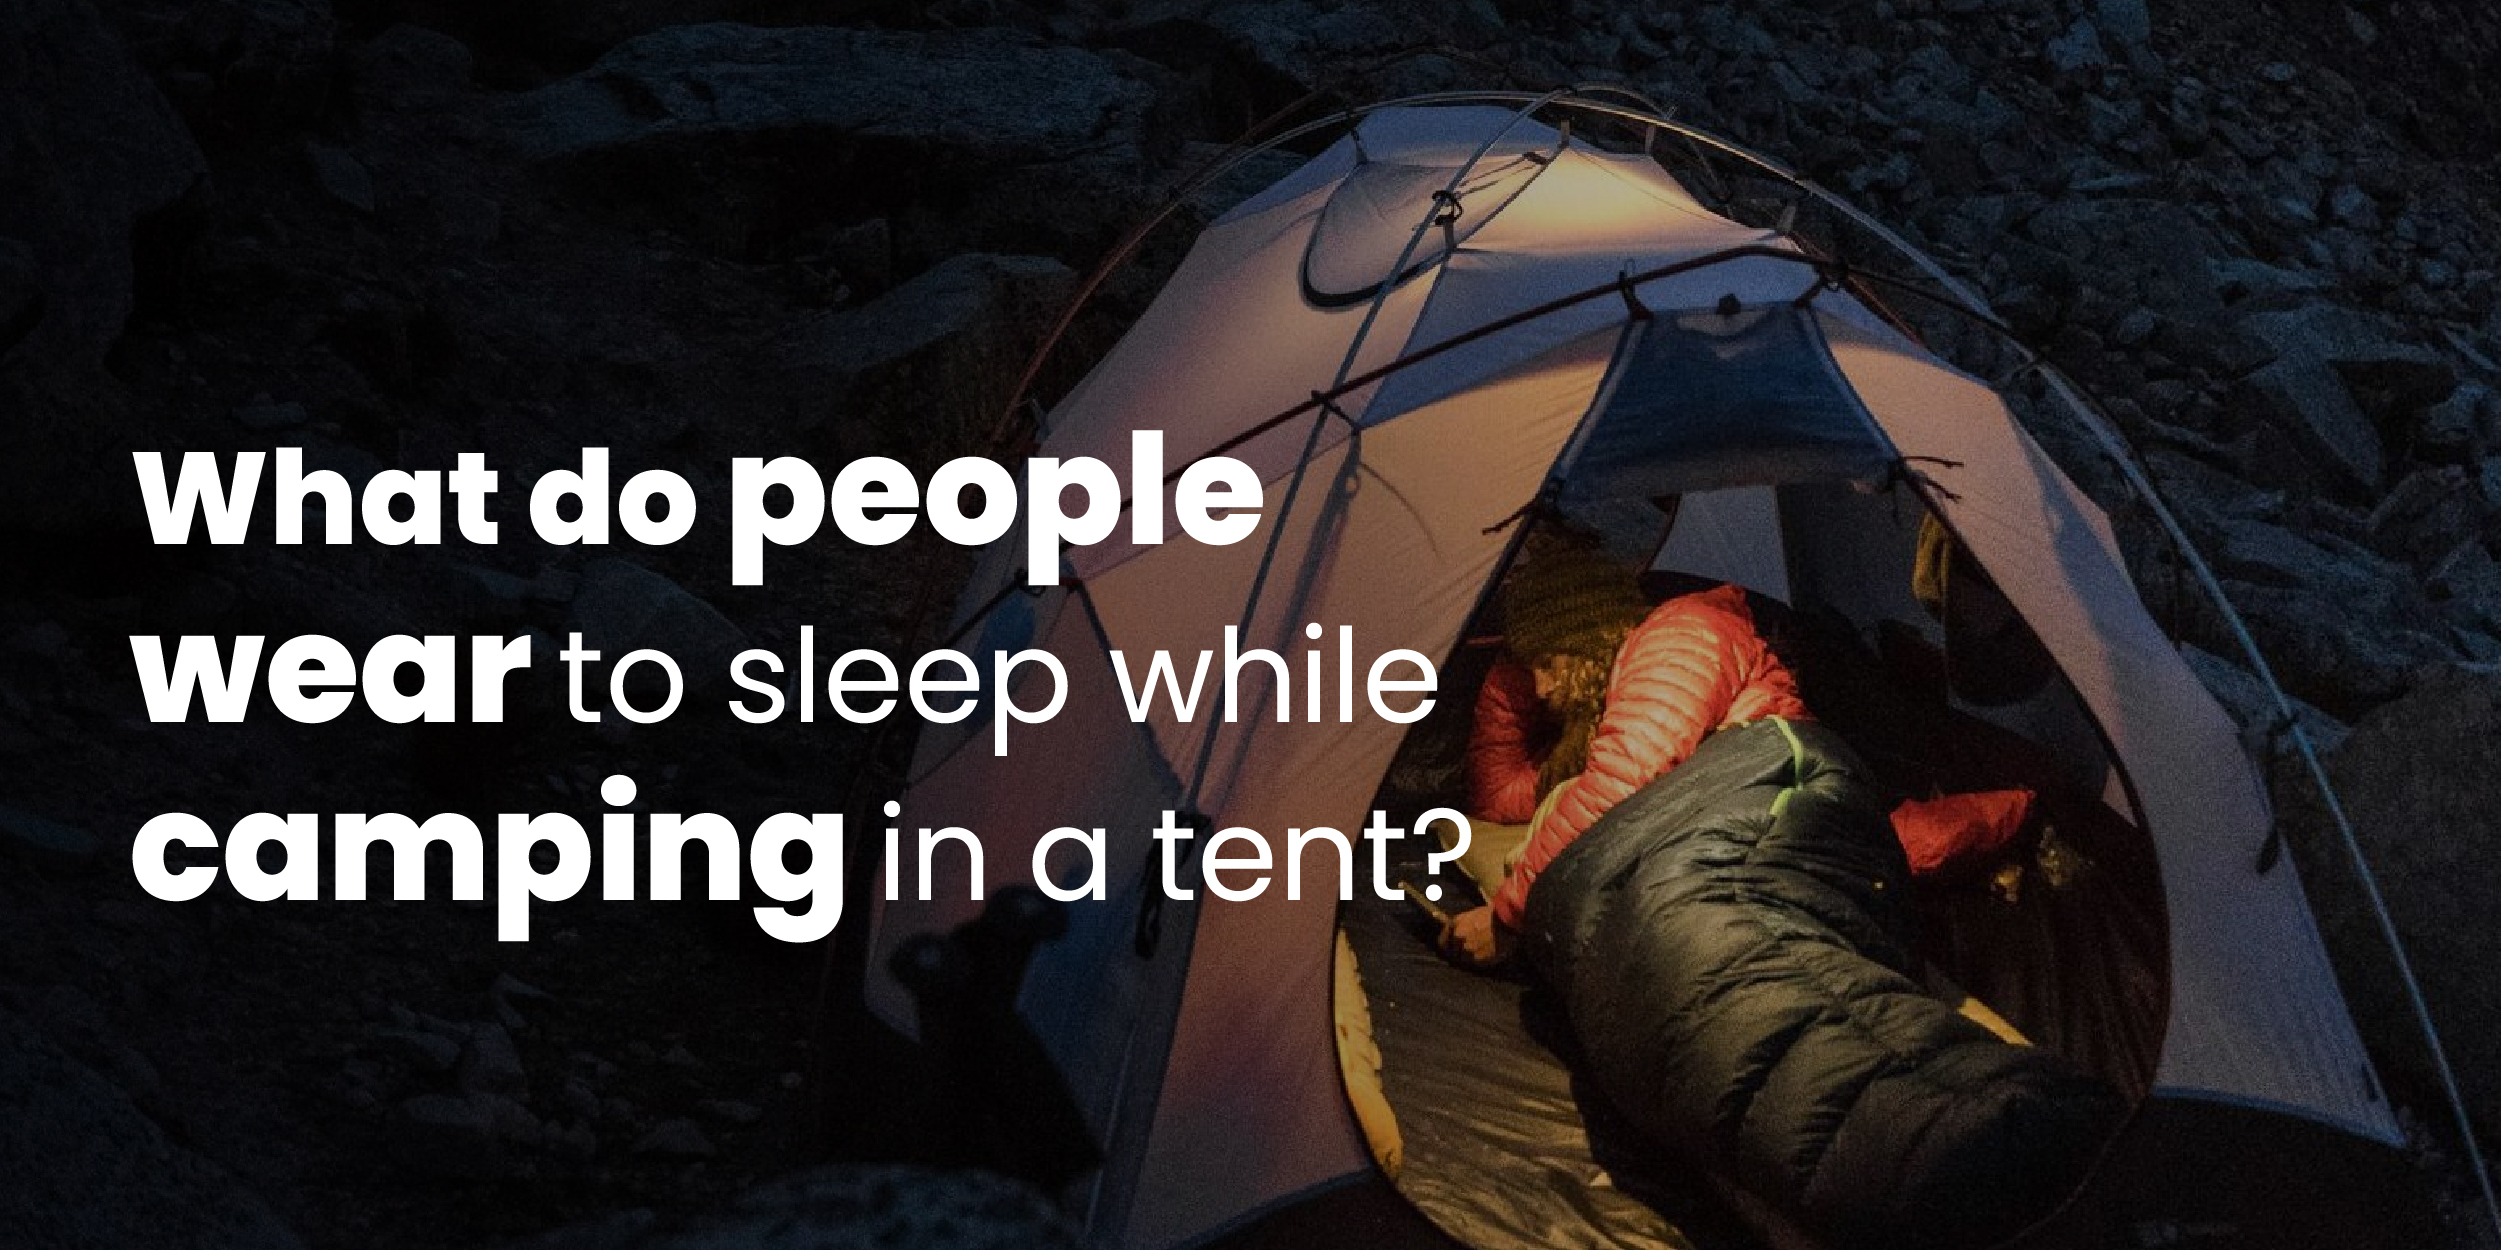 what do people wear to go sleeping in a tent